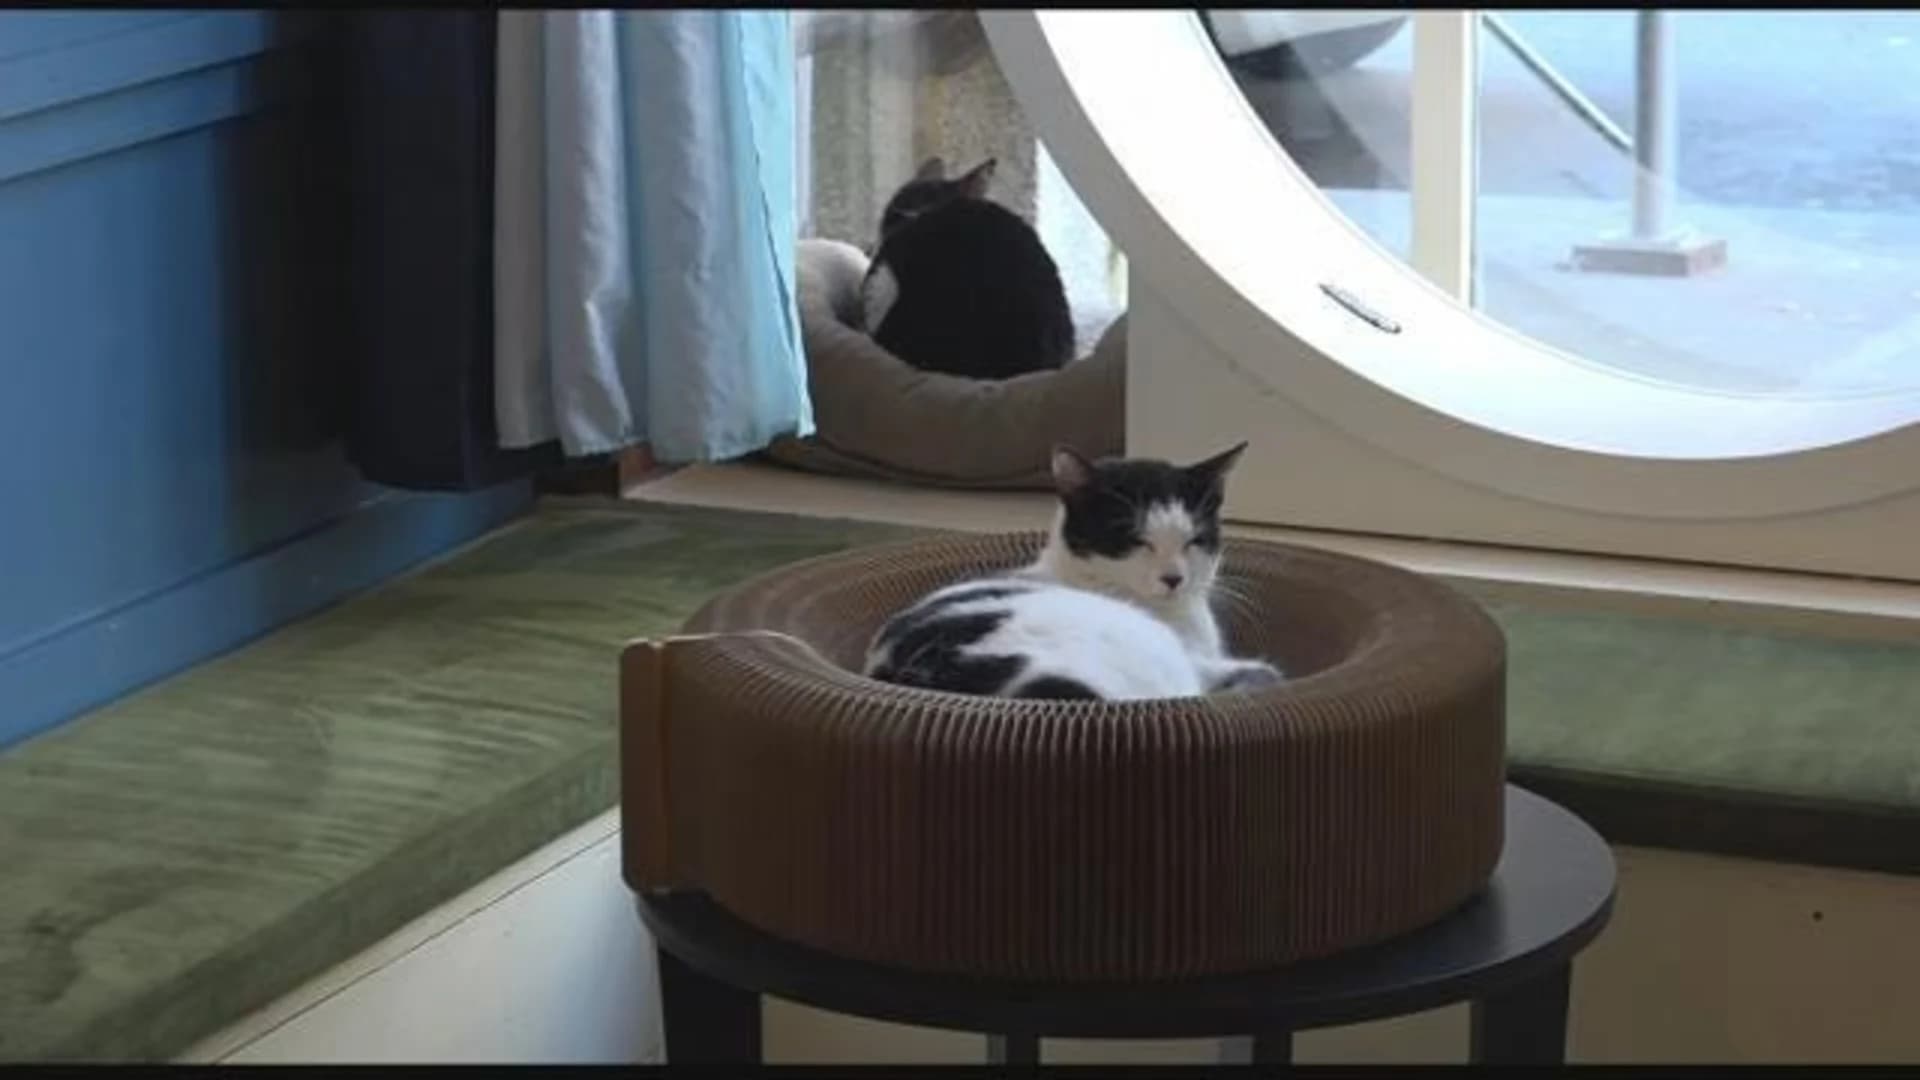 New location expands ‘paw-sibilities’ for Brooklyn Cat Cafe